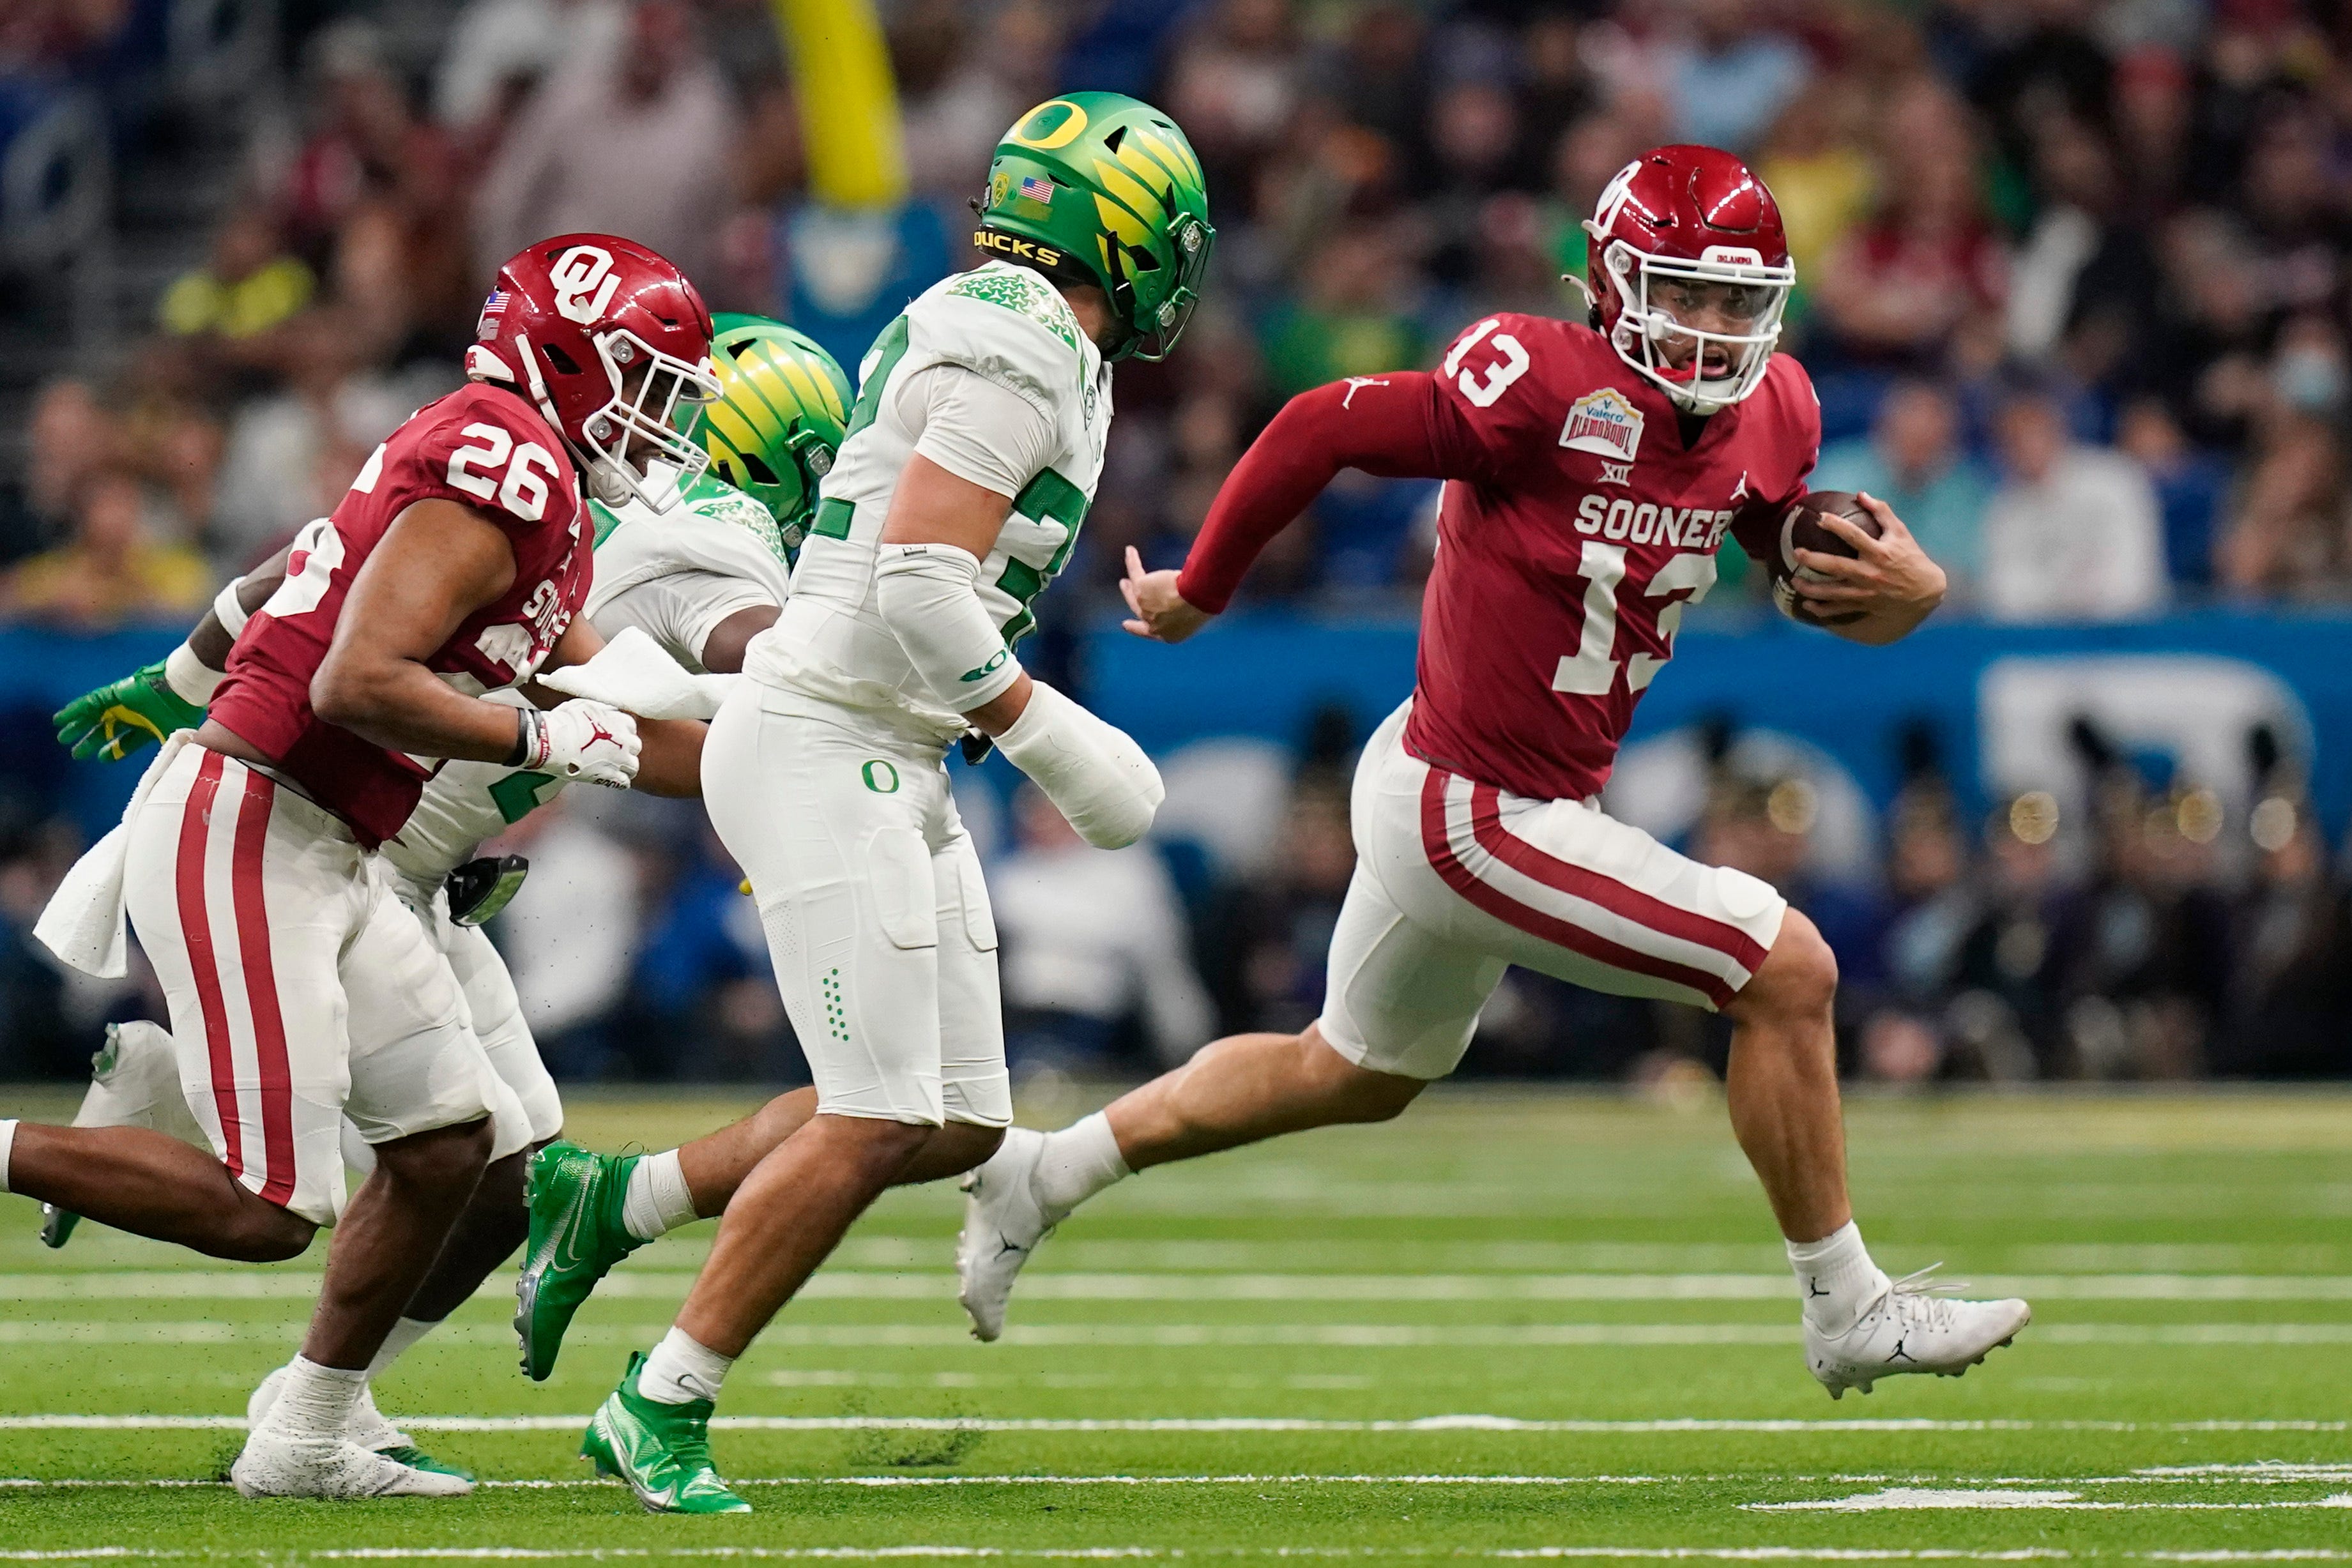 Game balls from Oklahoma's 47-32 win over Oregon in the Alamo Bowl